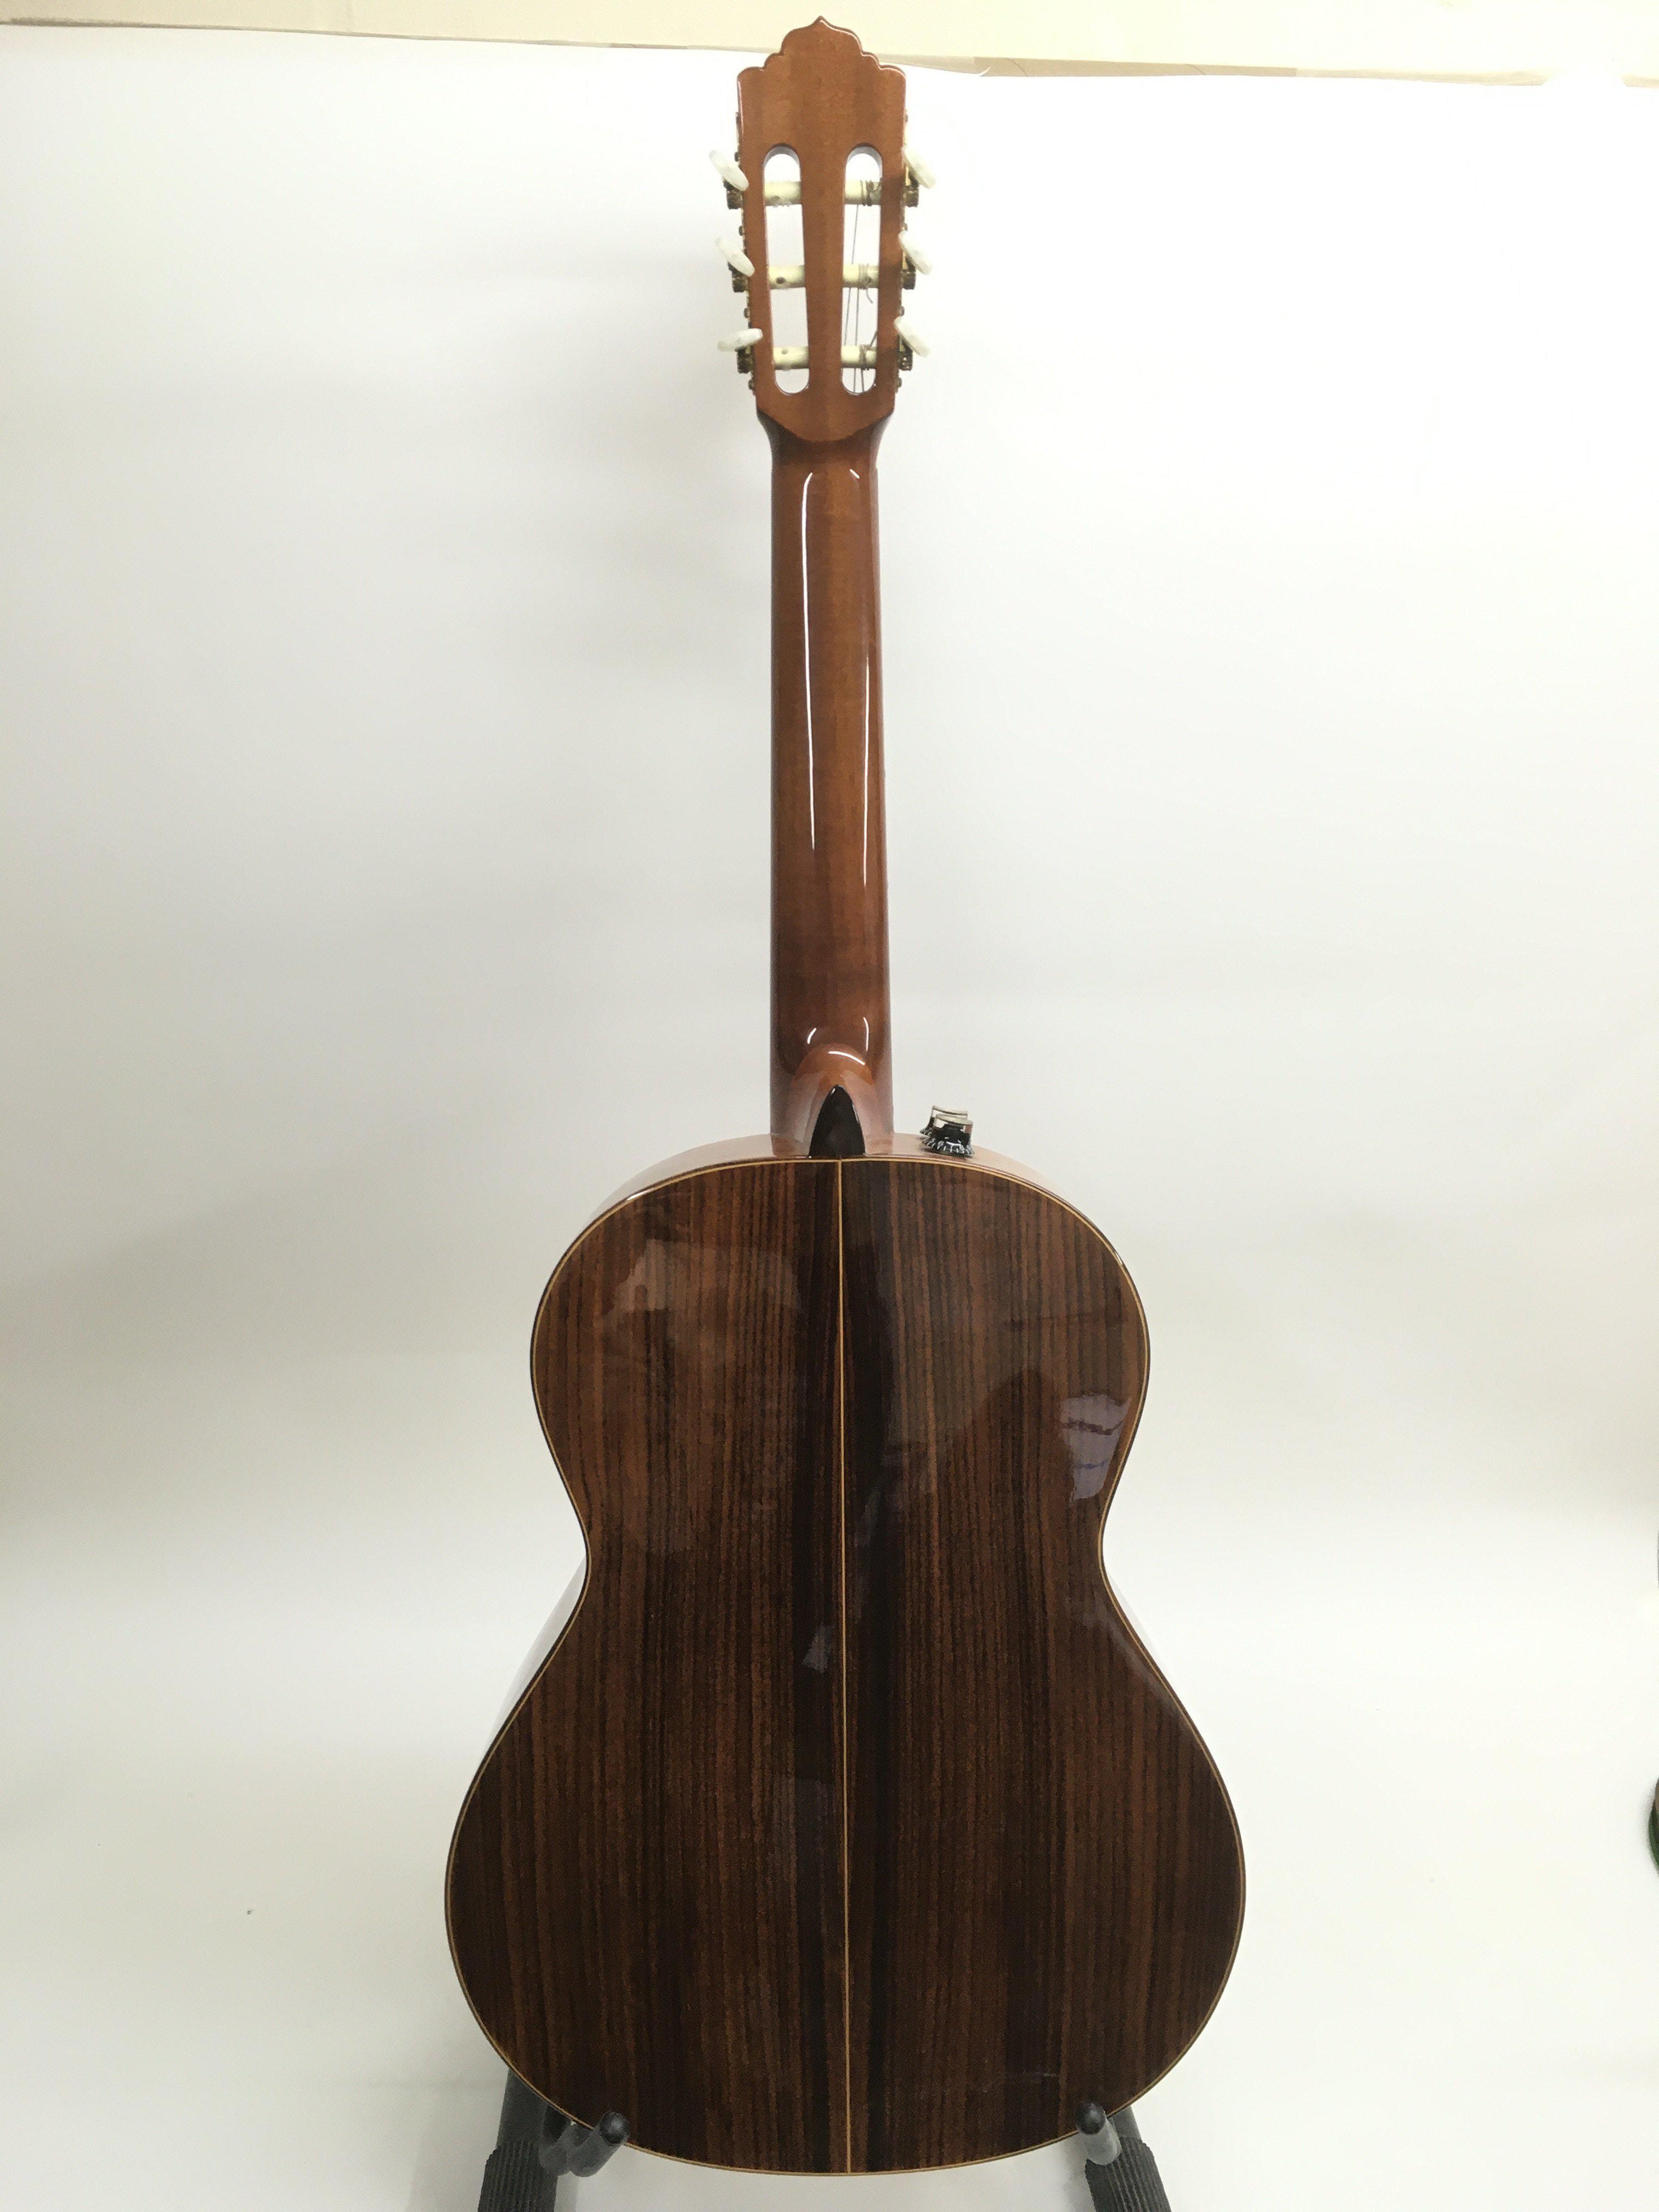 An Almansa model 434 classical guitar with a later fitted pickup beneath the saddle and control - Image 5 of 5